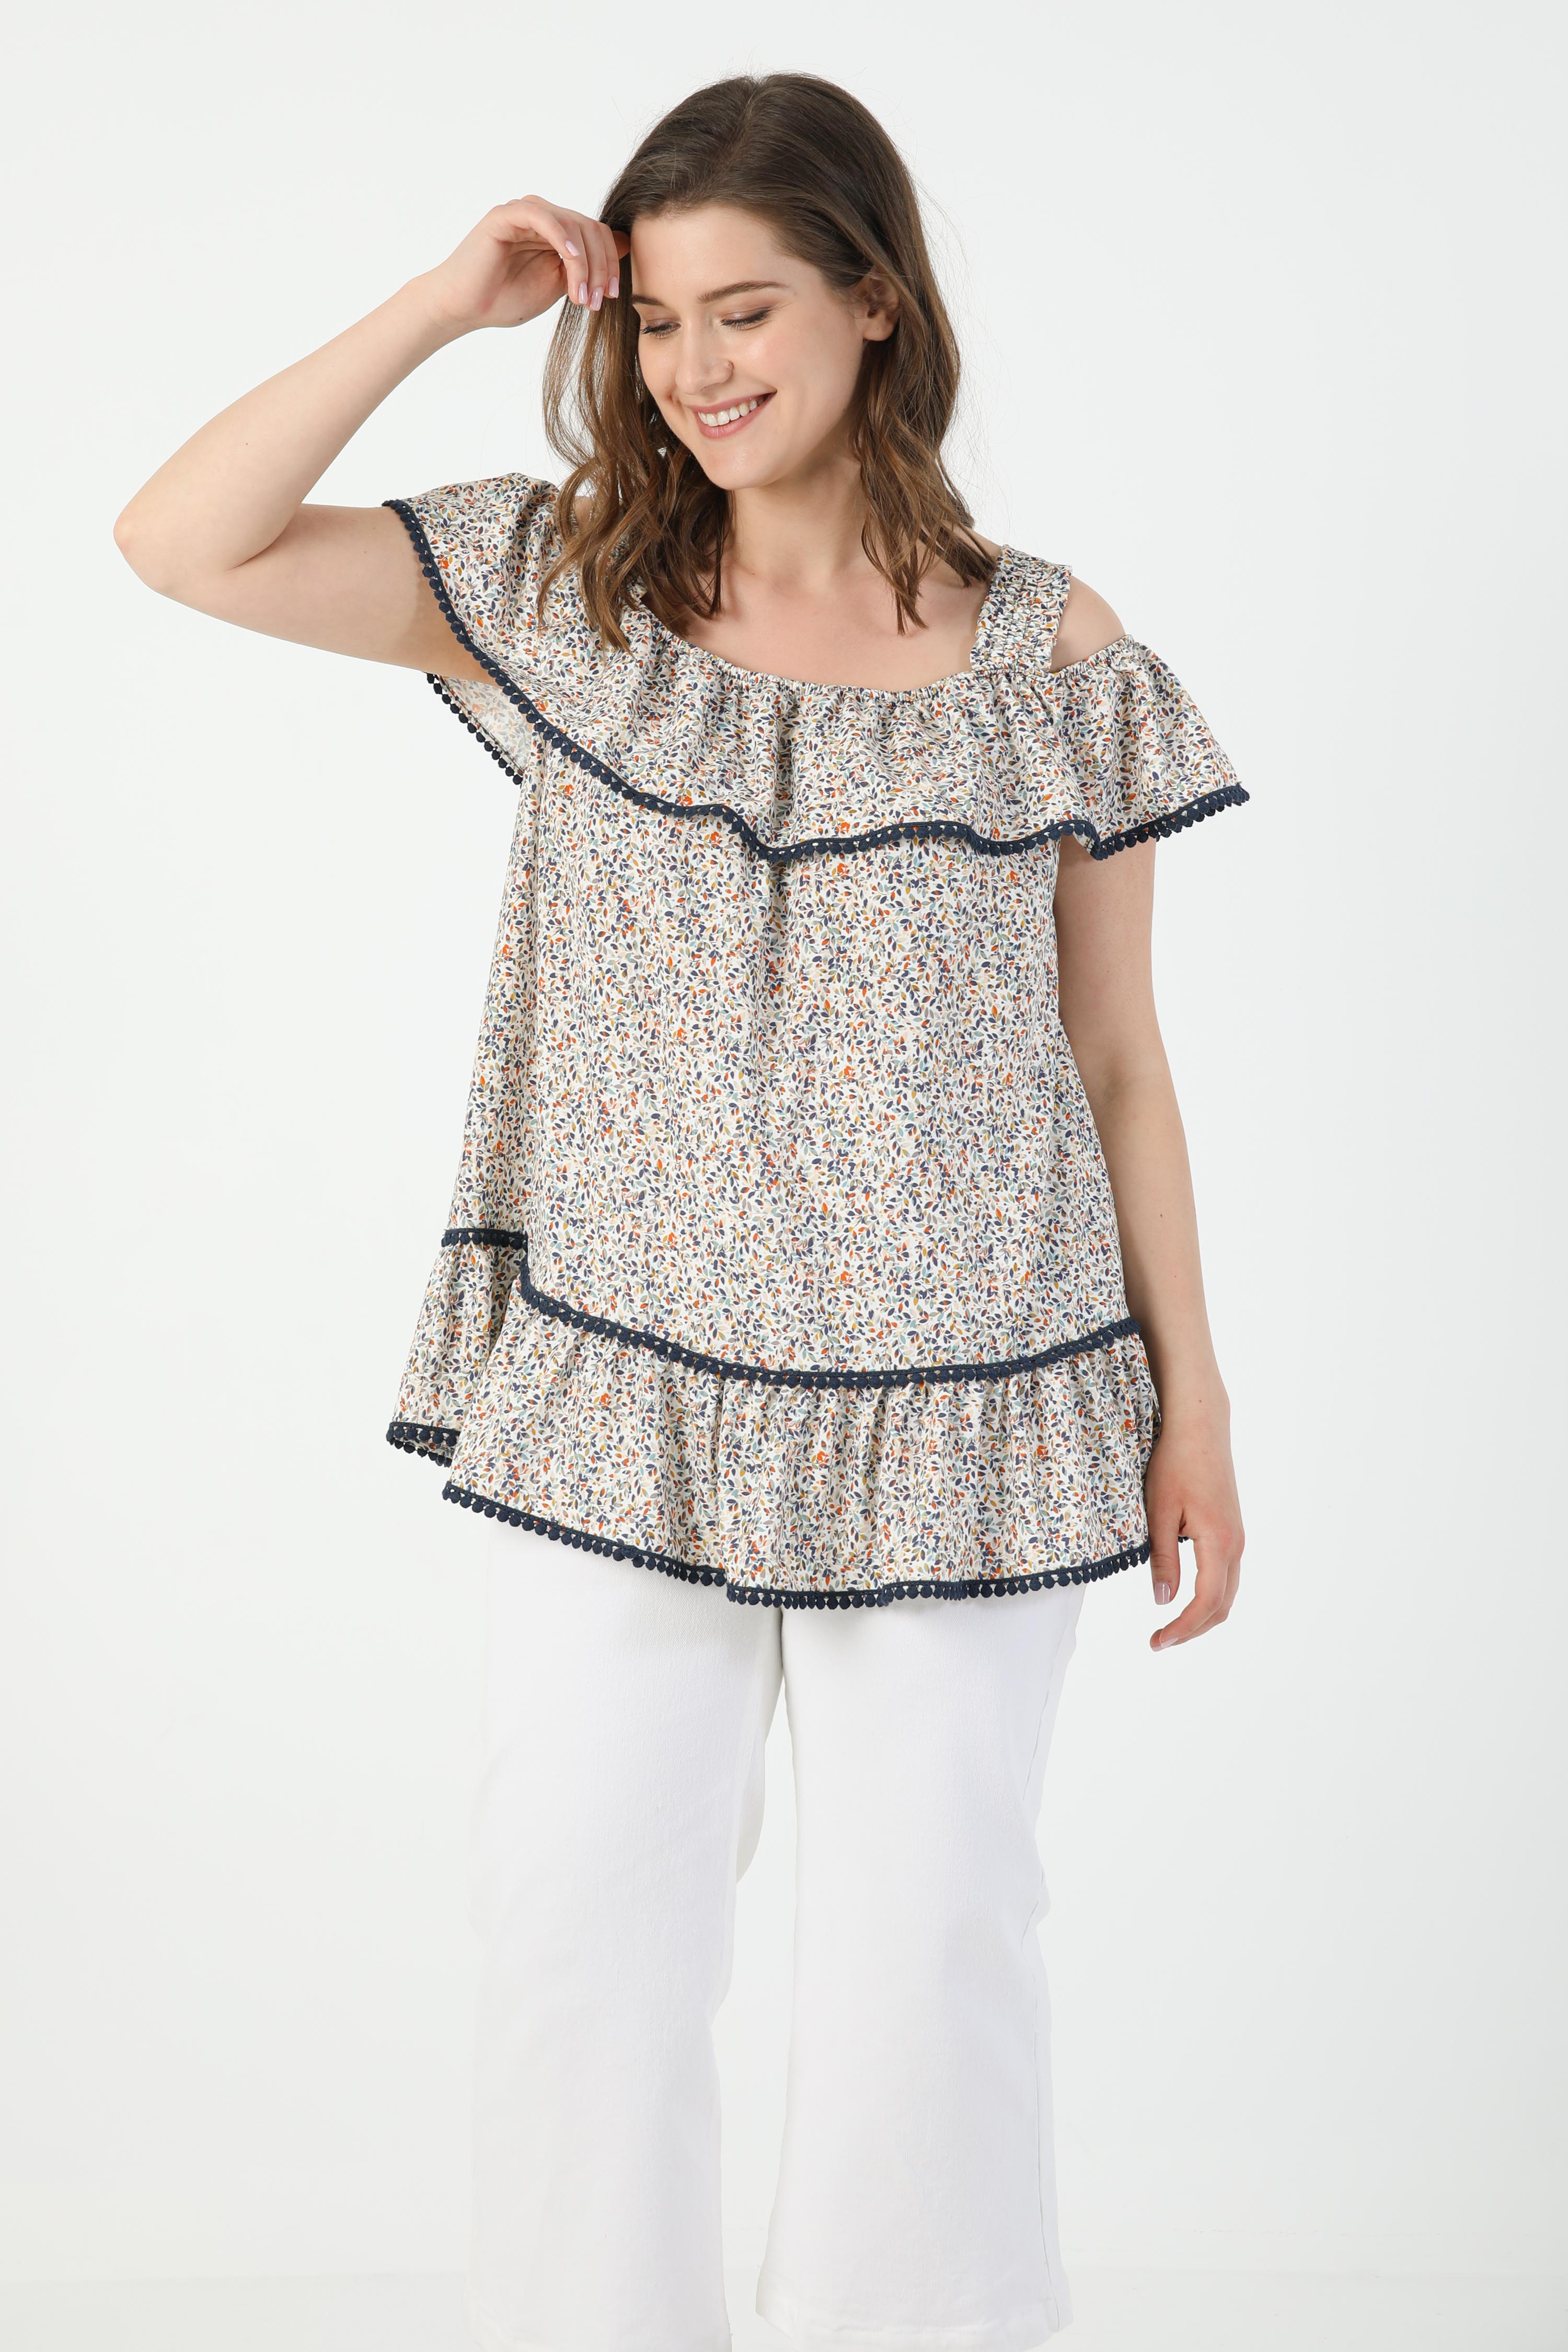 Printed blouse with suspenders (shipping May 5/10)